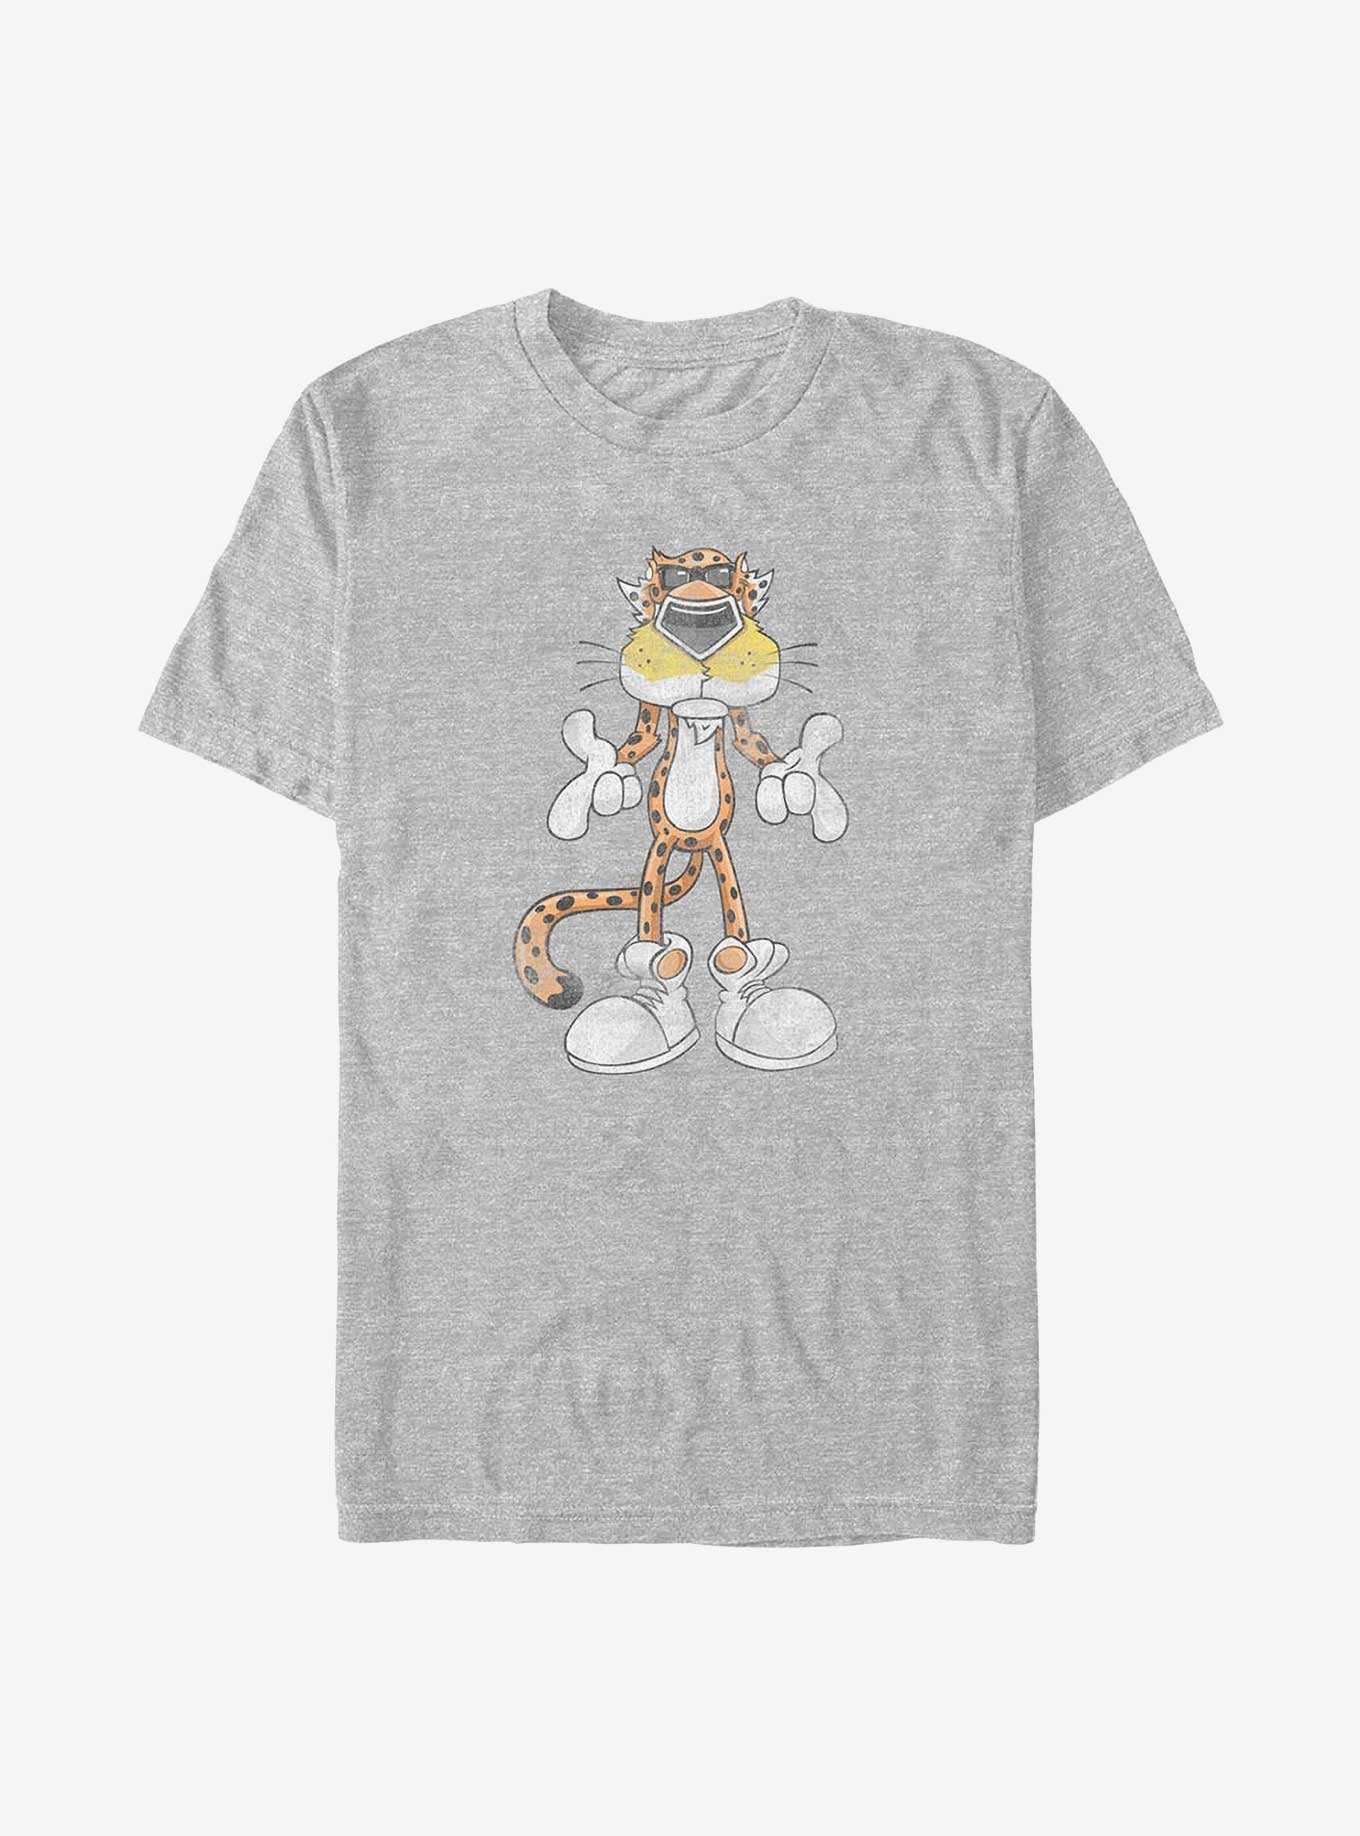 Cheetos Distressed Chester T-Shirt, , hi-res